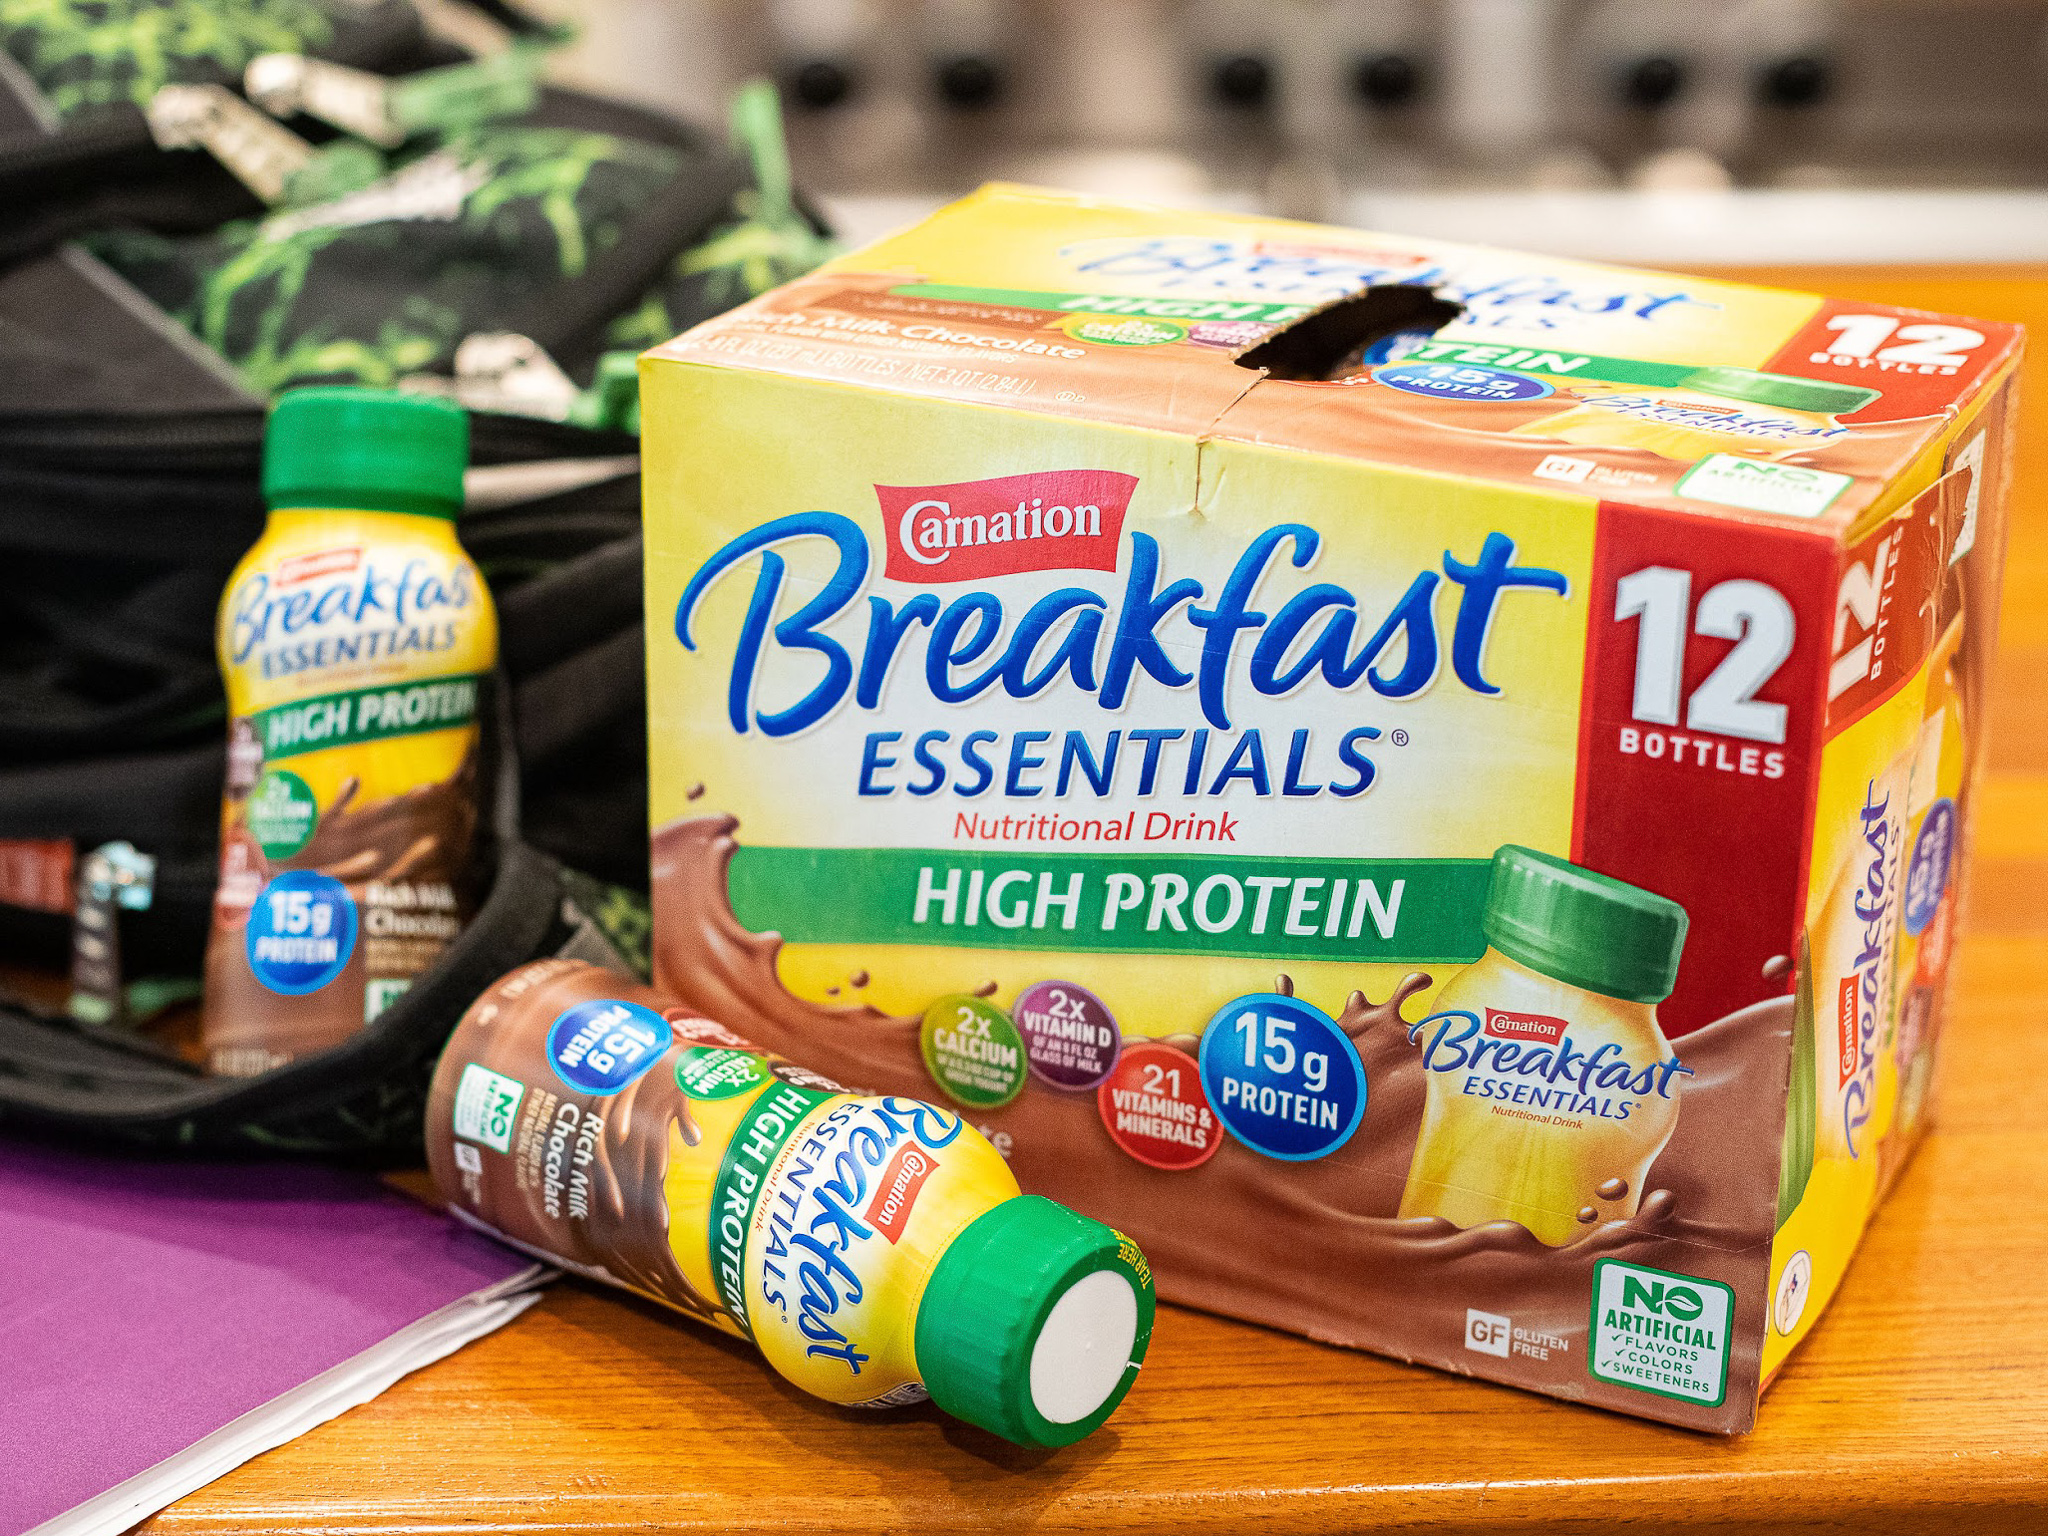 Save $4 On Delicious And Convenient Carnation Breakfast Essentials® At Publix on I Heart Publix